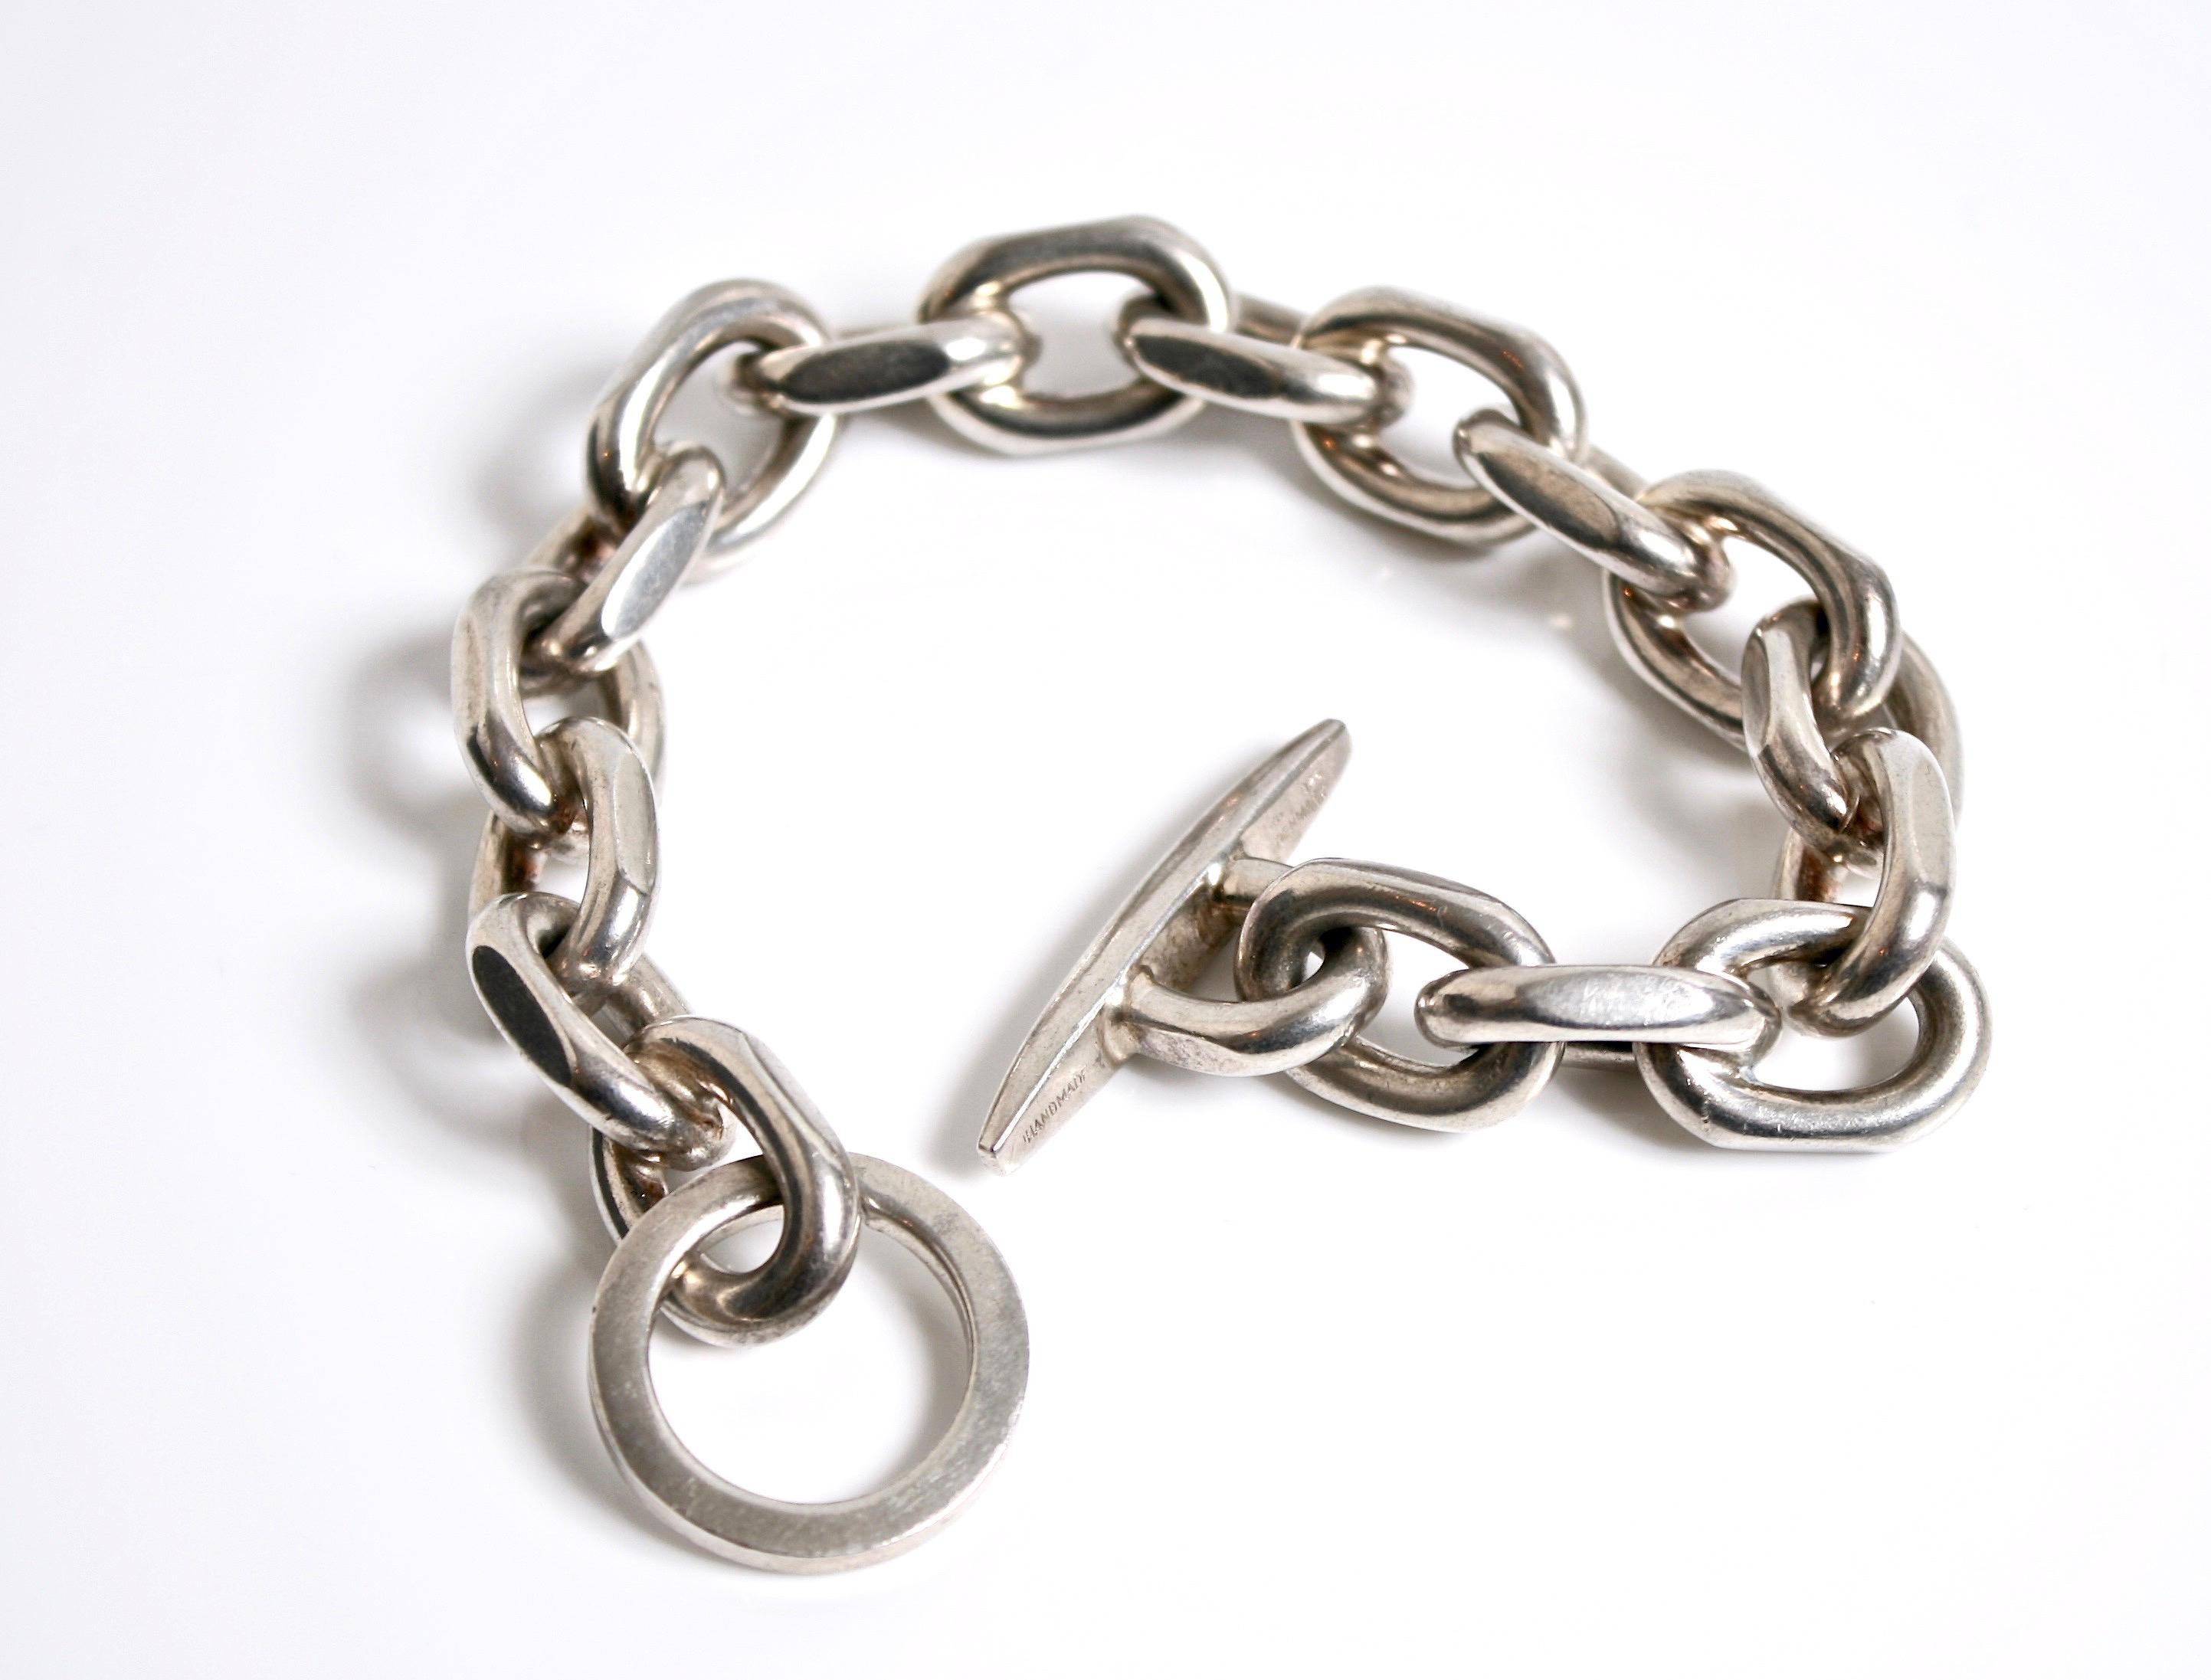 Heavy link sterling silver hand made chain bracelet designed by Randers Denmark c.1970 signed RS Denmark
Squared links with large O ring

